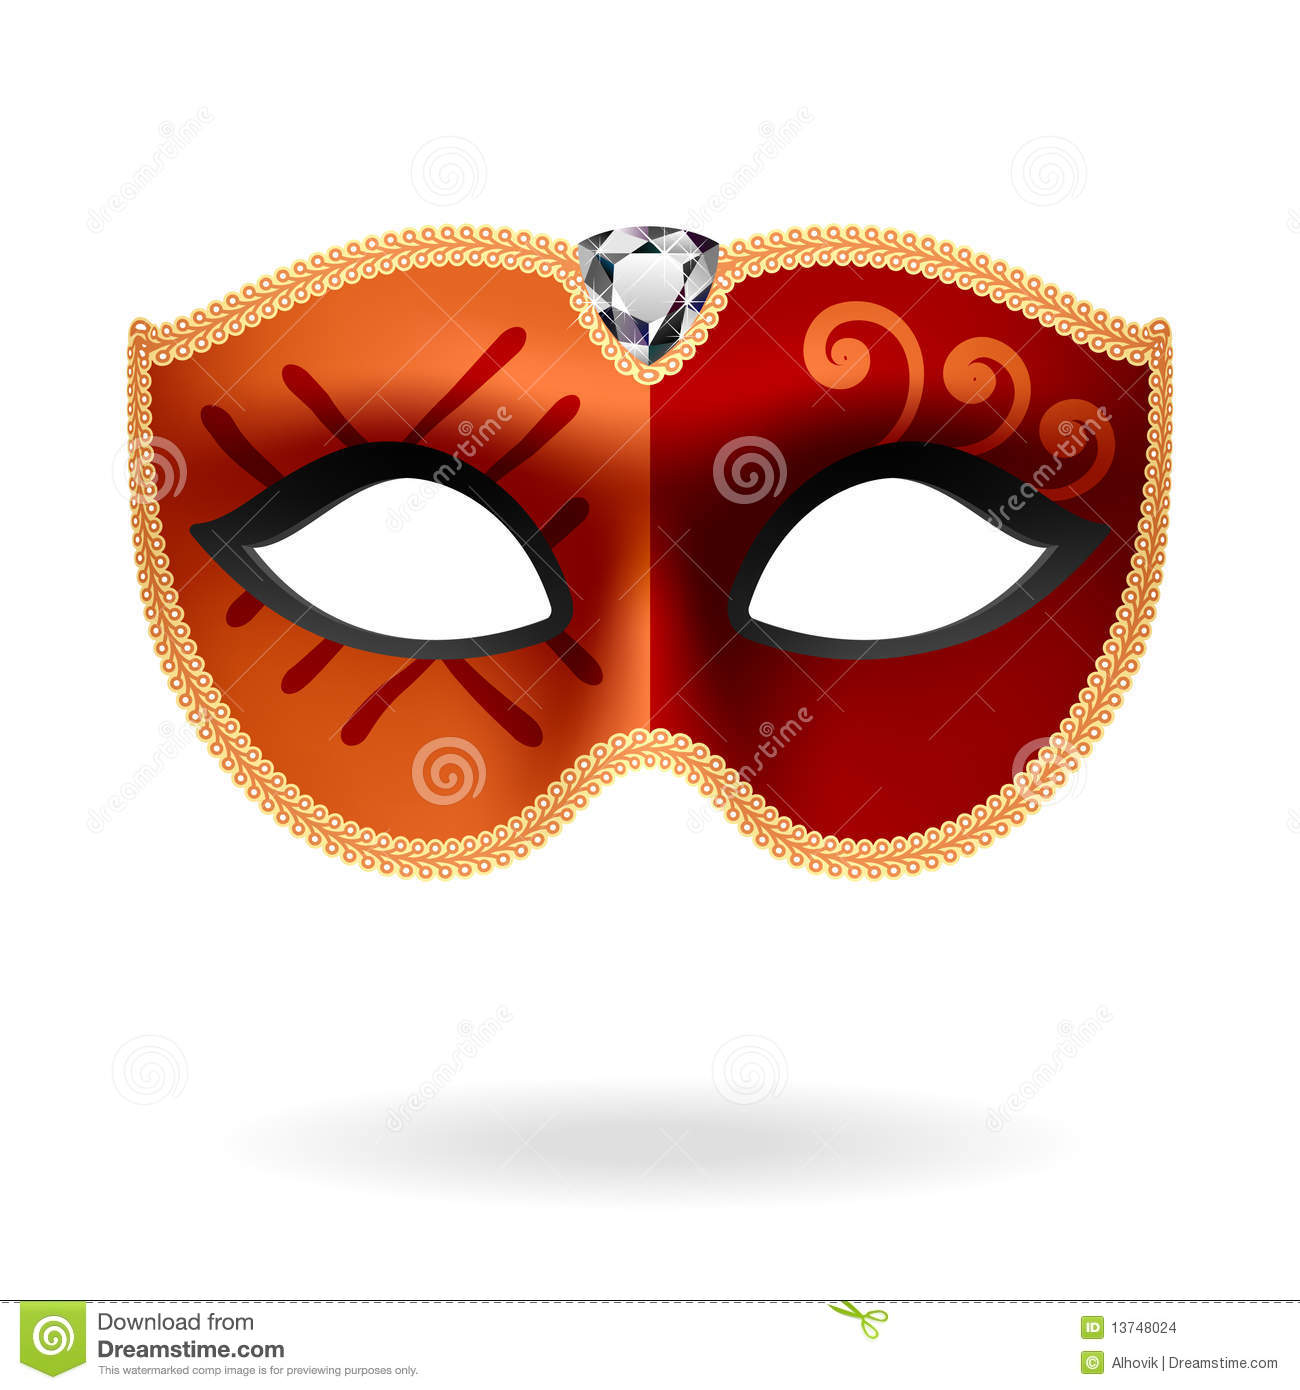 Masquerade Mask Stock Images